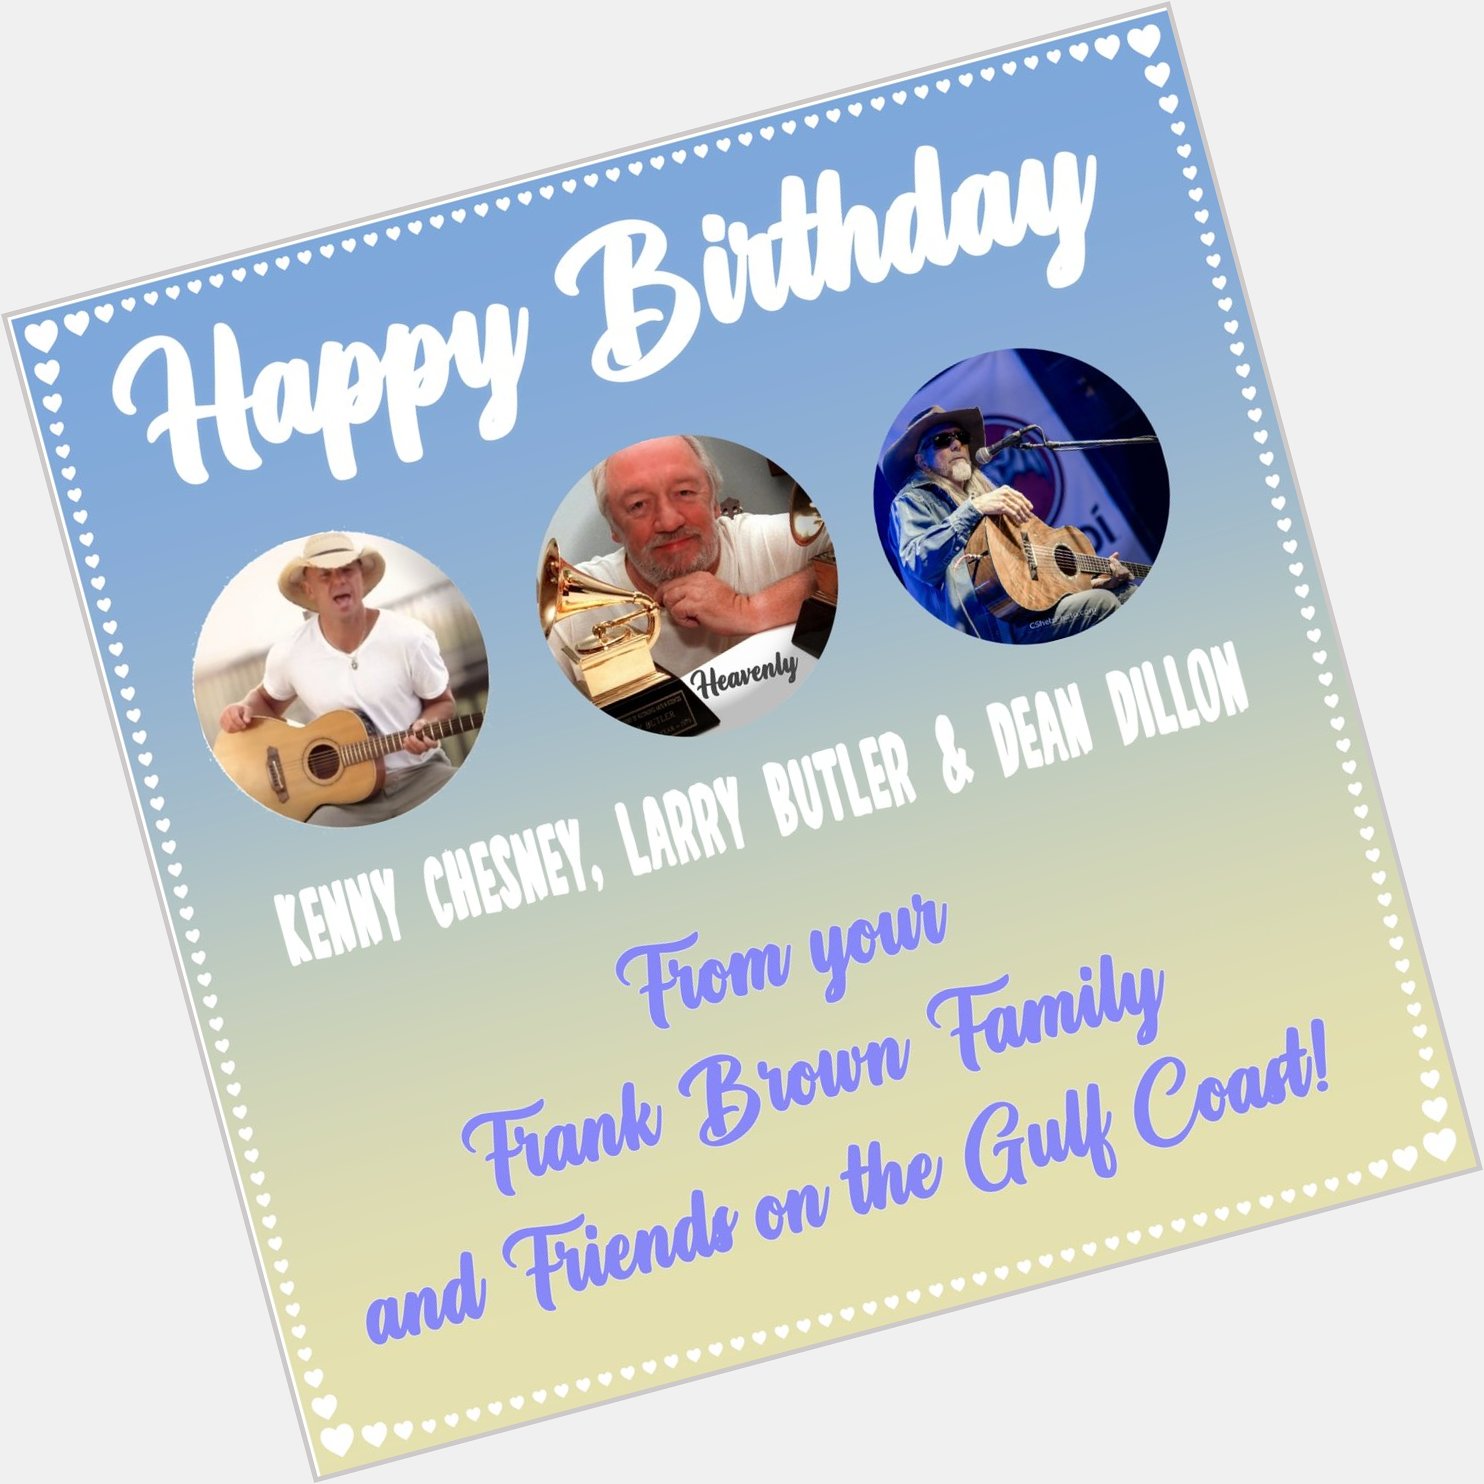 Happy Birthday to three GREATS!   
Kenny Chesney, Larry Butler & Dean Dillon
-From your Frank Brown Family! 